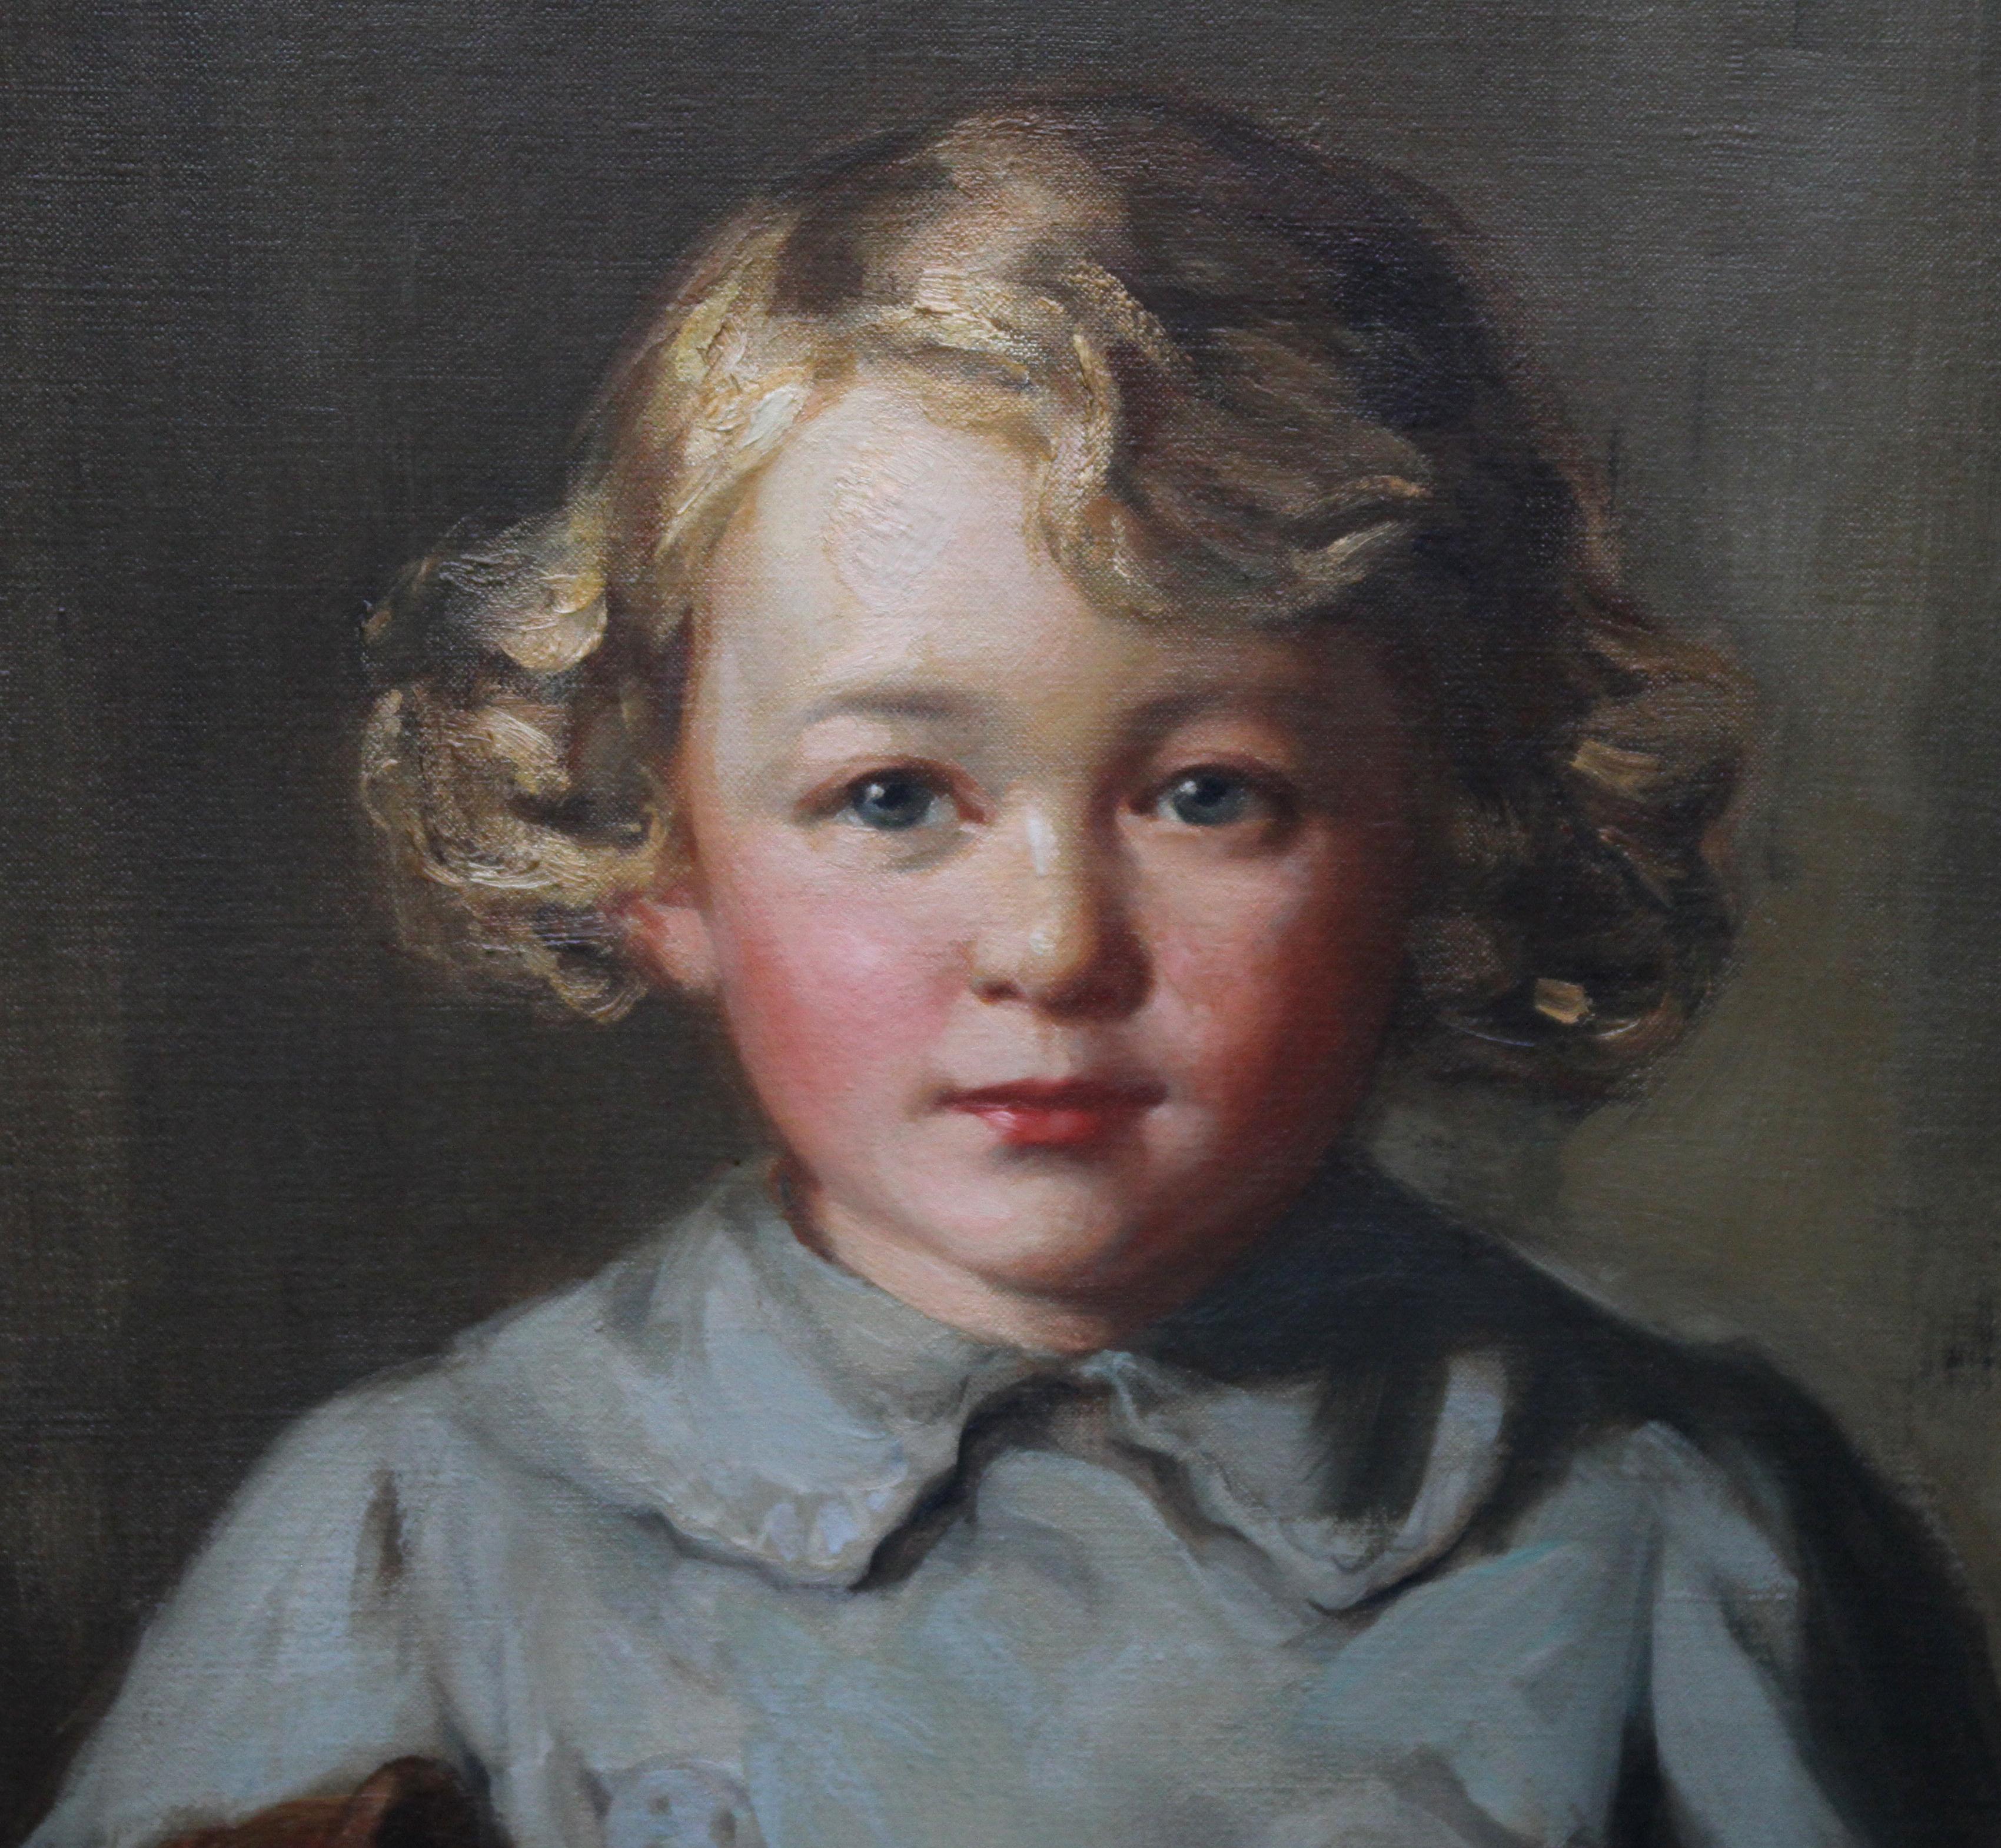 Portrait of a Boy with Teddy Bear - Scottish Art exh. RSA Portrait Oil Ppainting - Realist Painting by Robert Hope